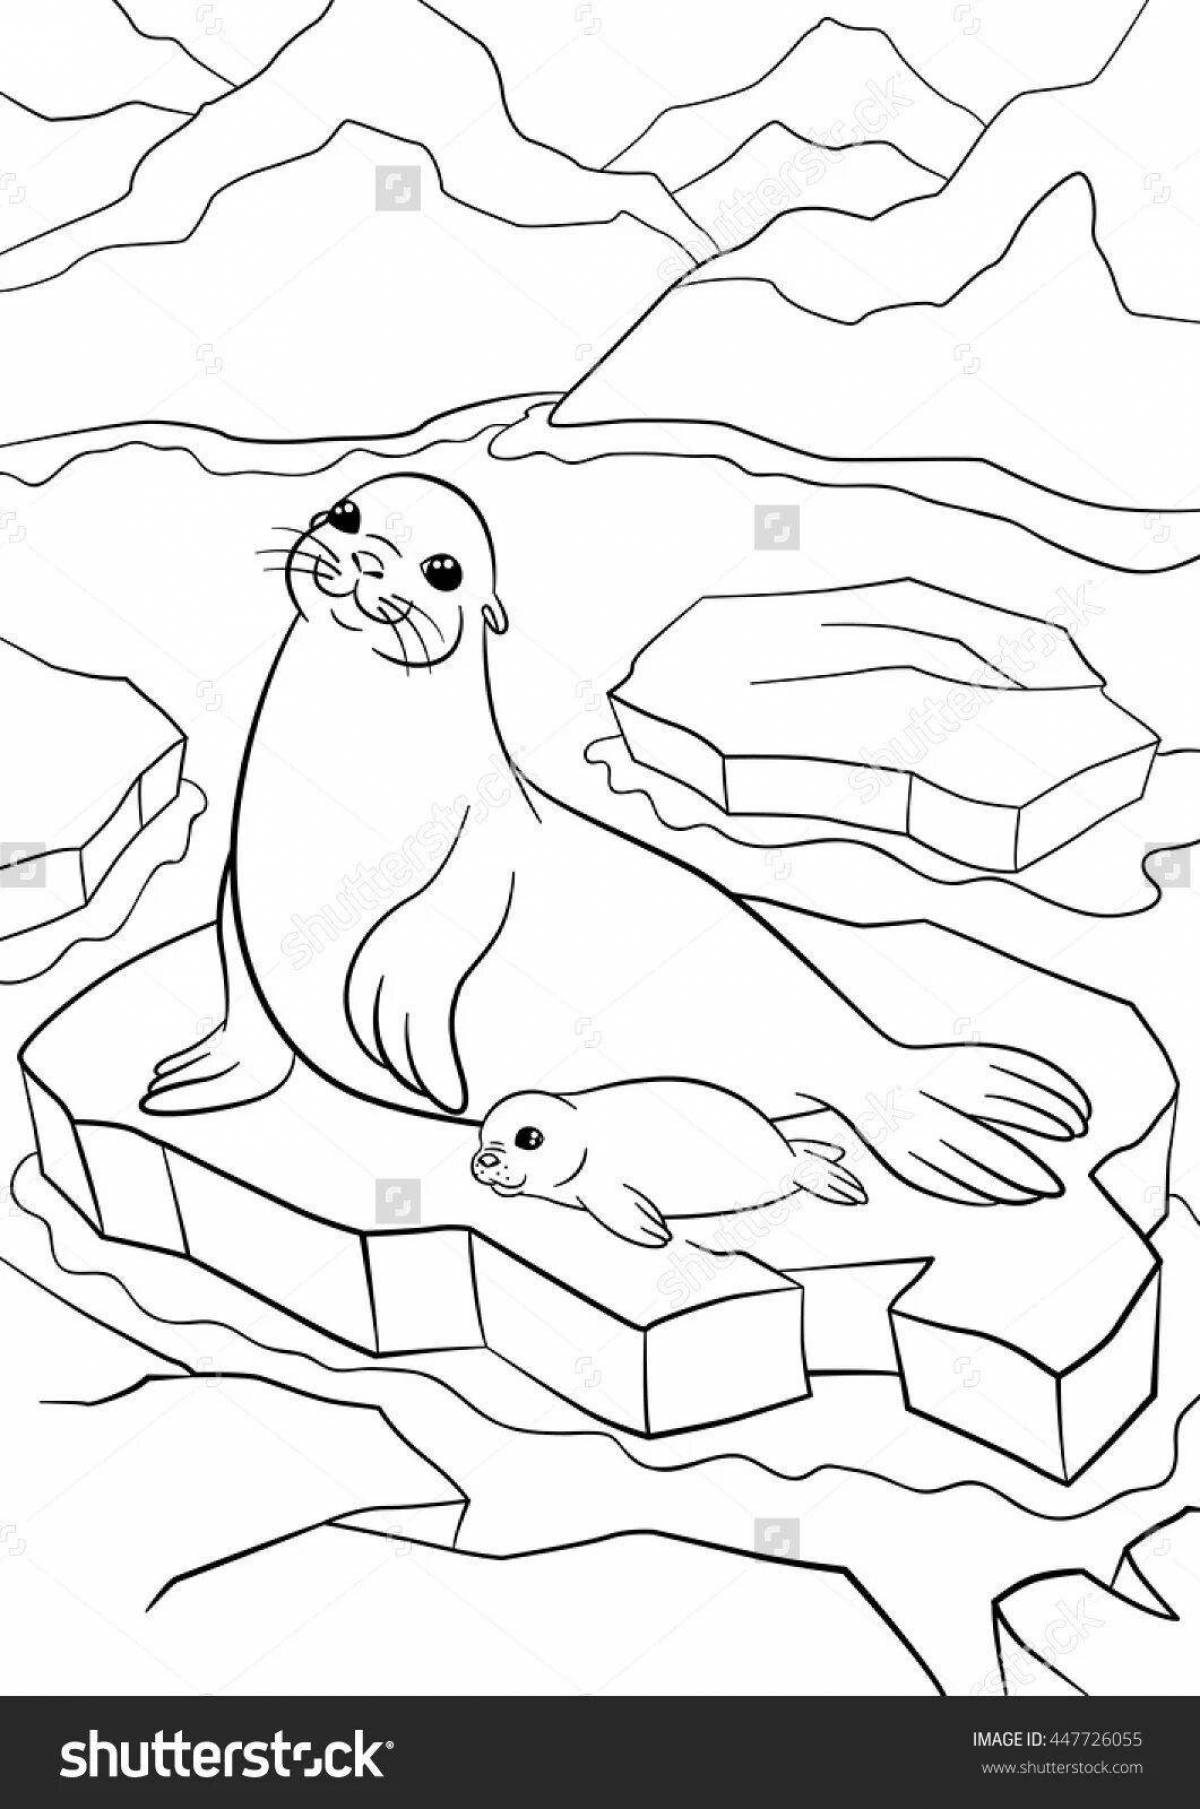 Bright ice floe coloring page for kids